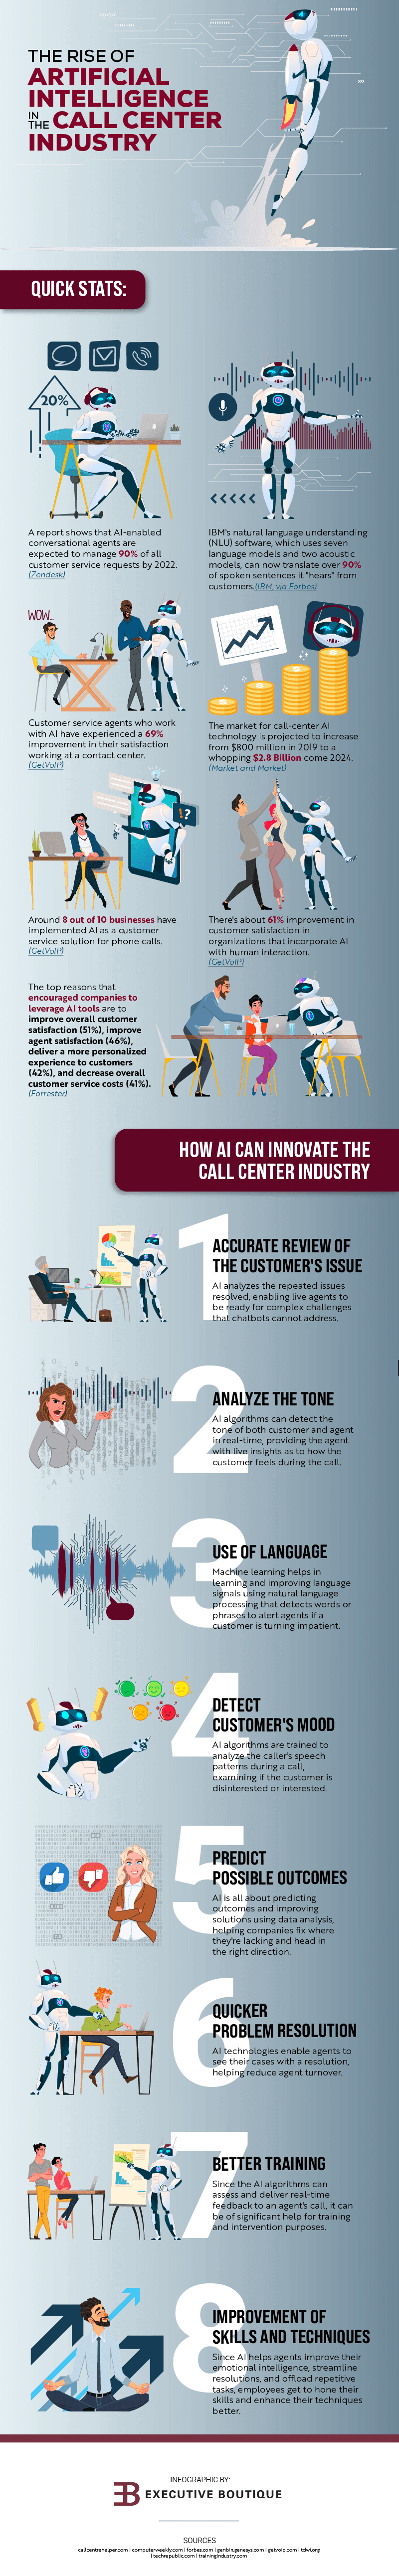 the rise of ai in the call center industry infographic